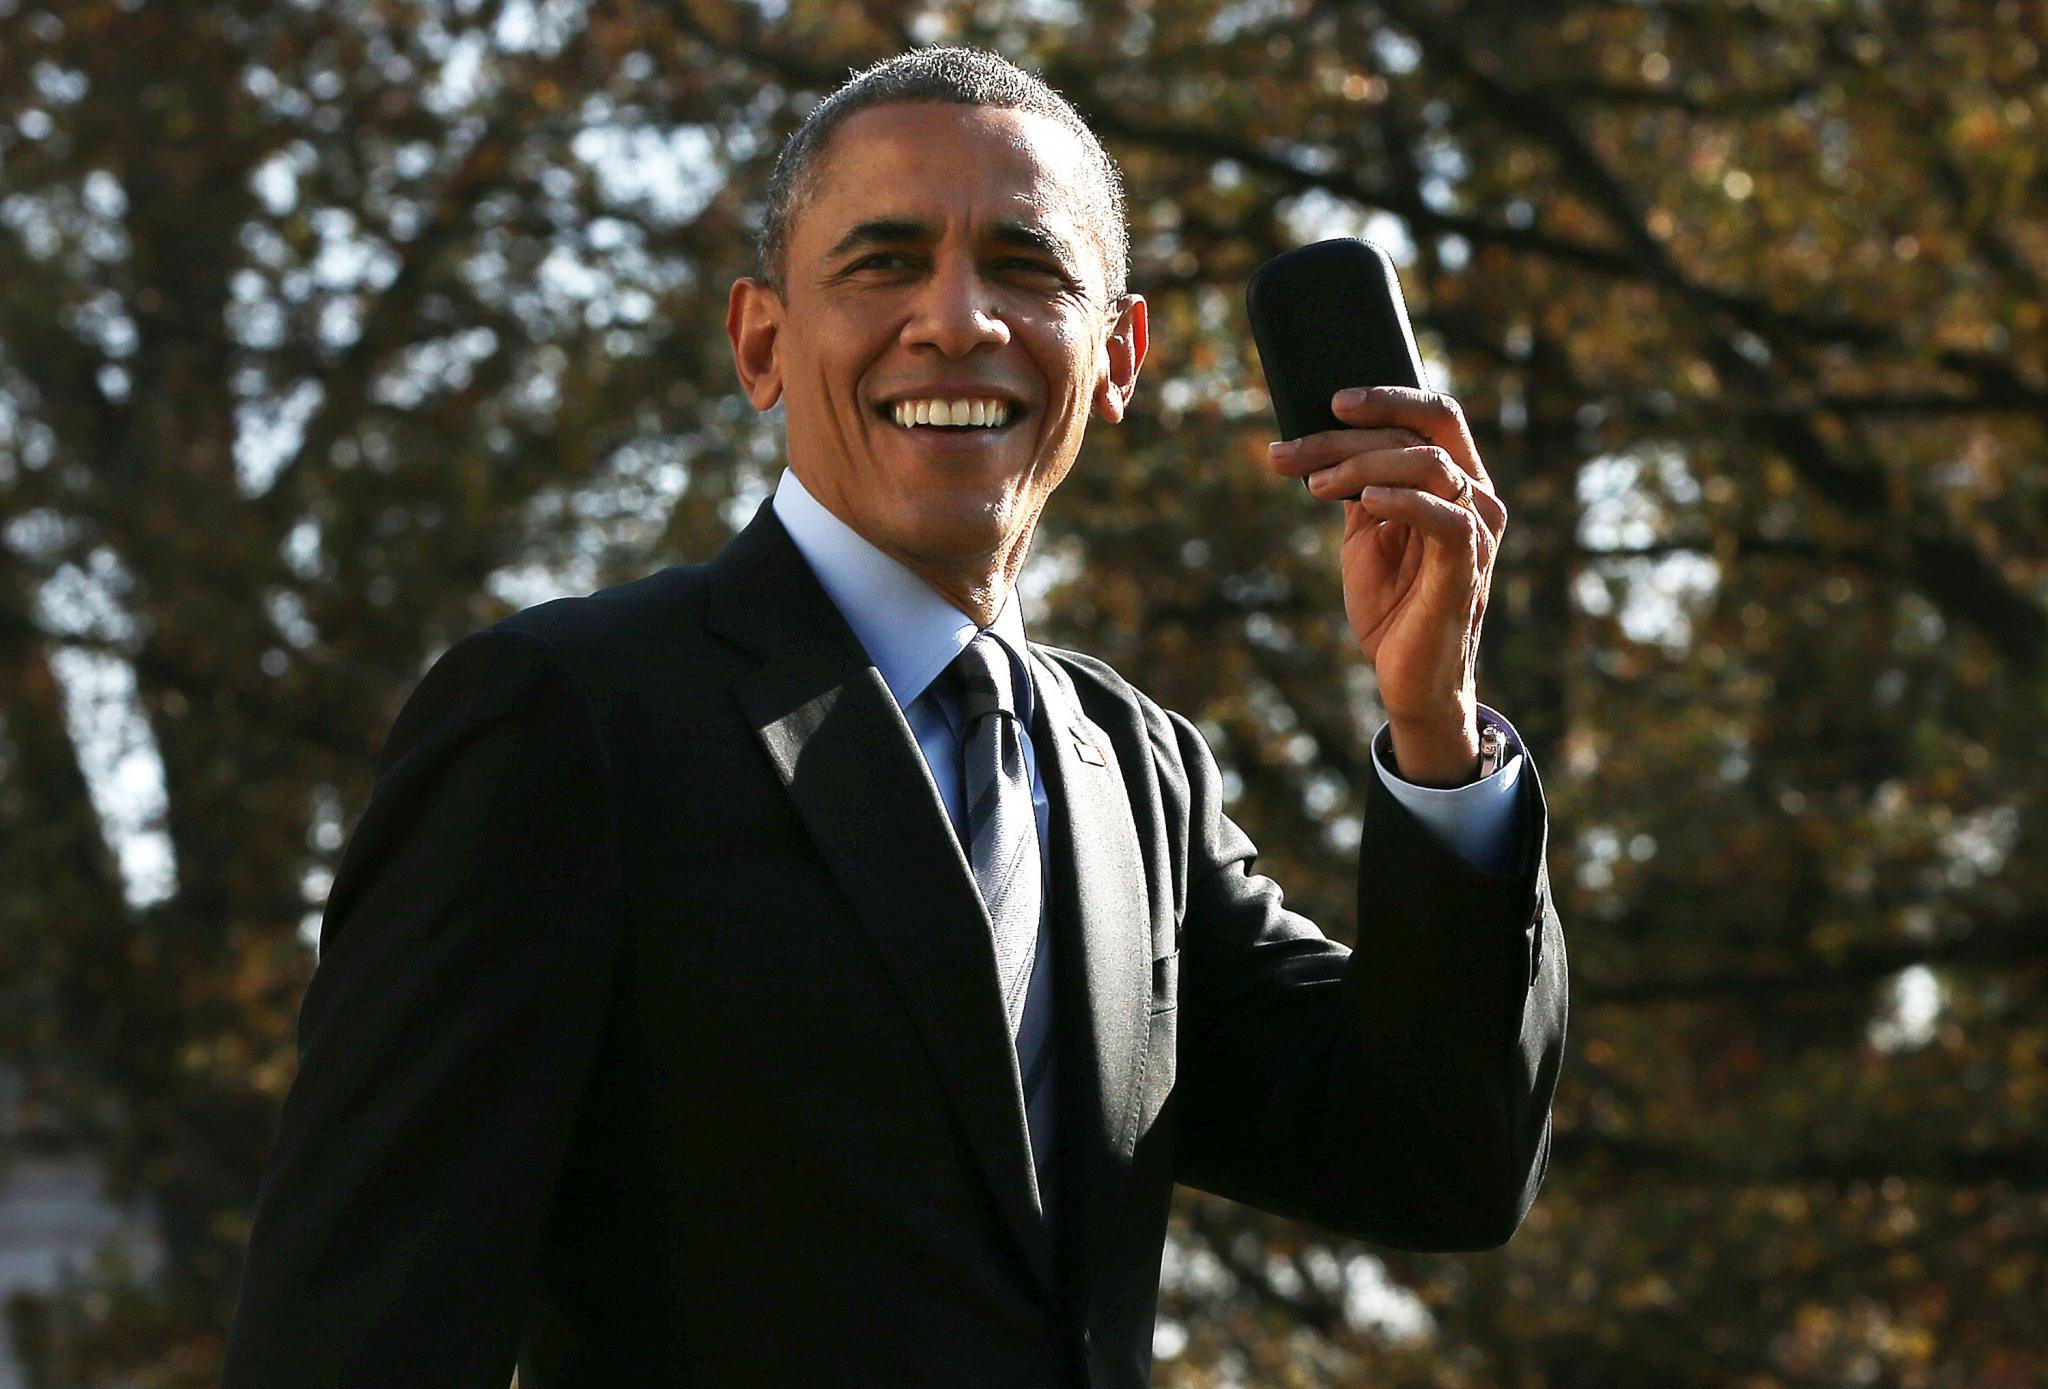 President Obama Finally Gets His Own Twitter Account
